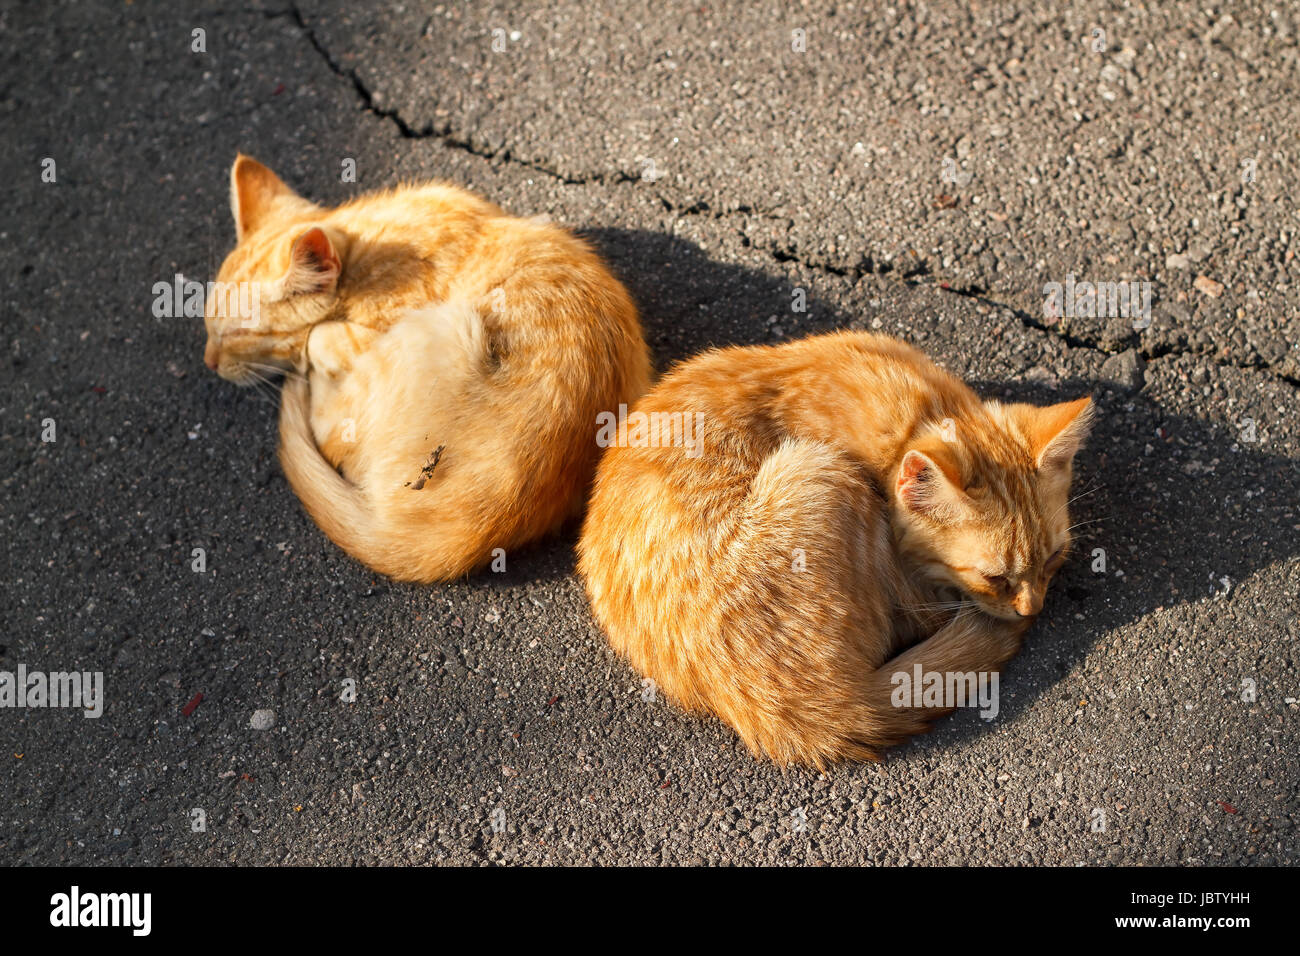 Two ginger kittens sleeping next to each other in the street Stock Photo